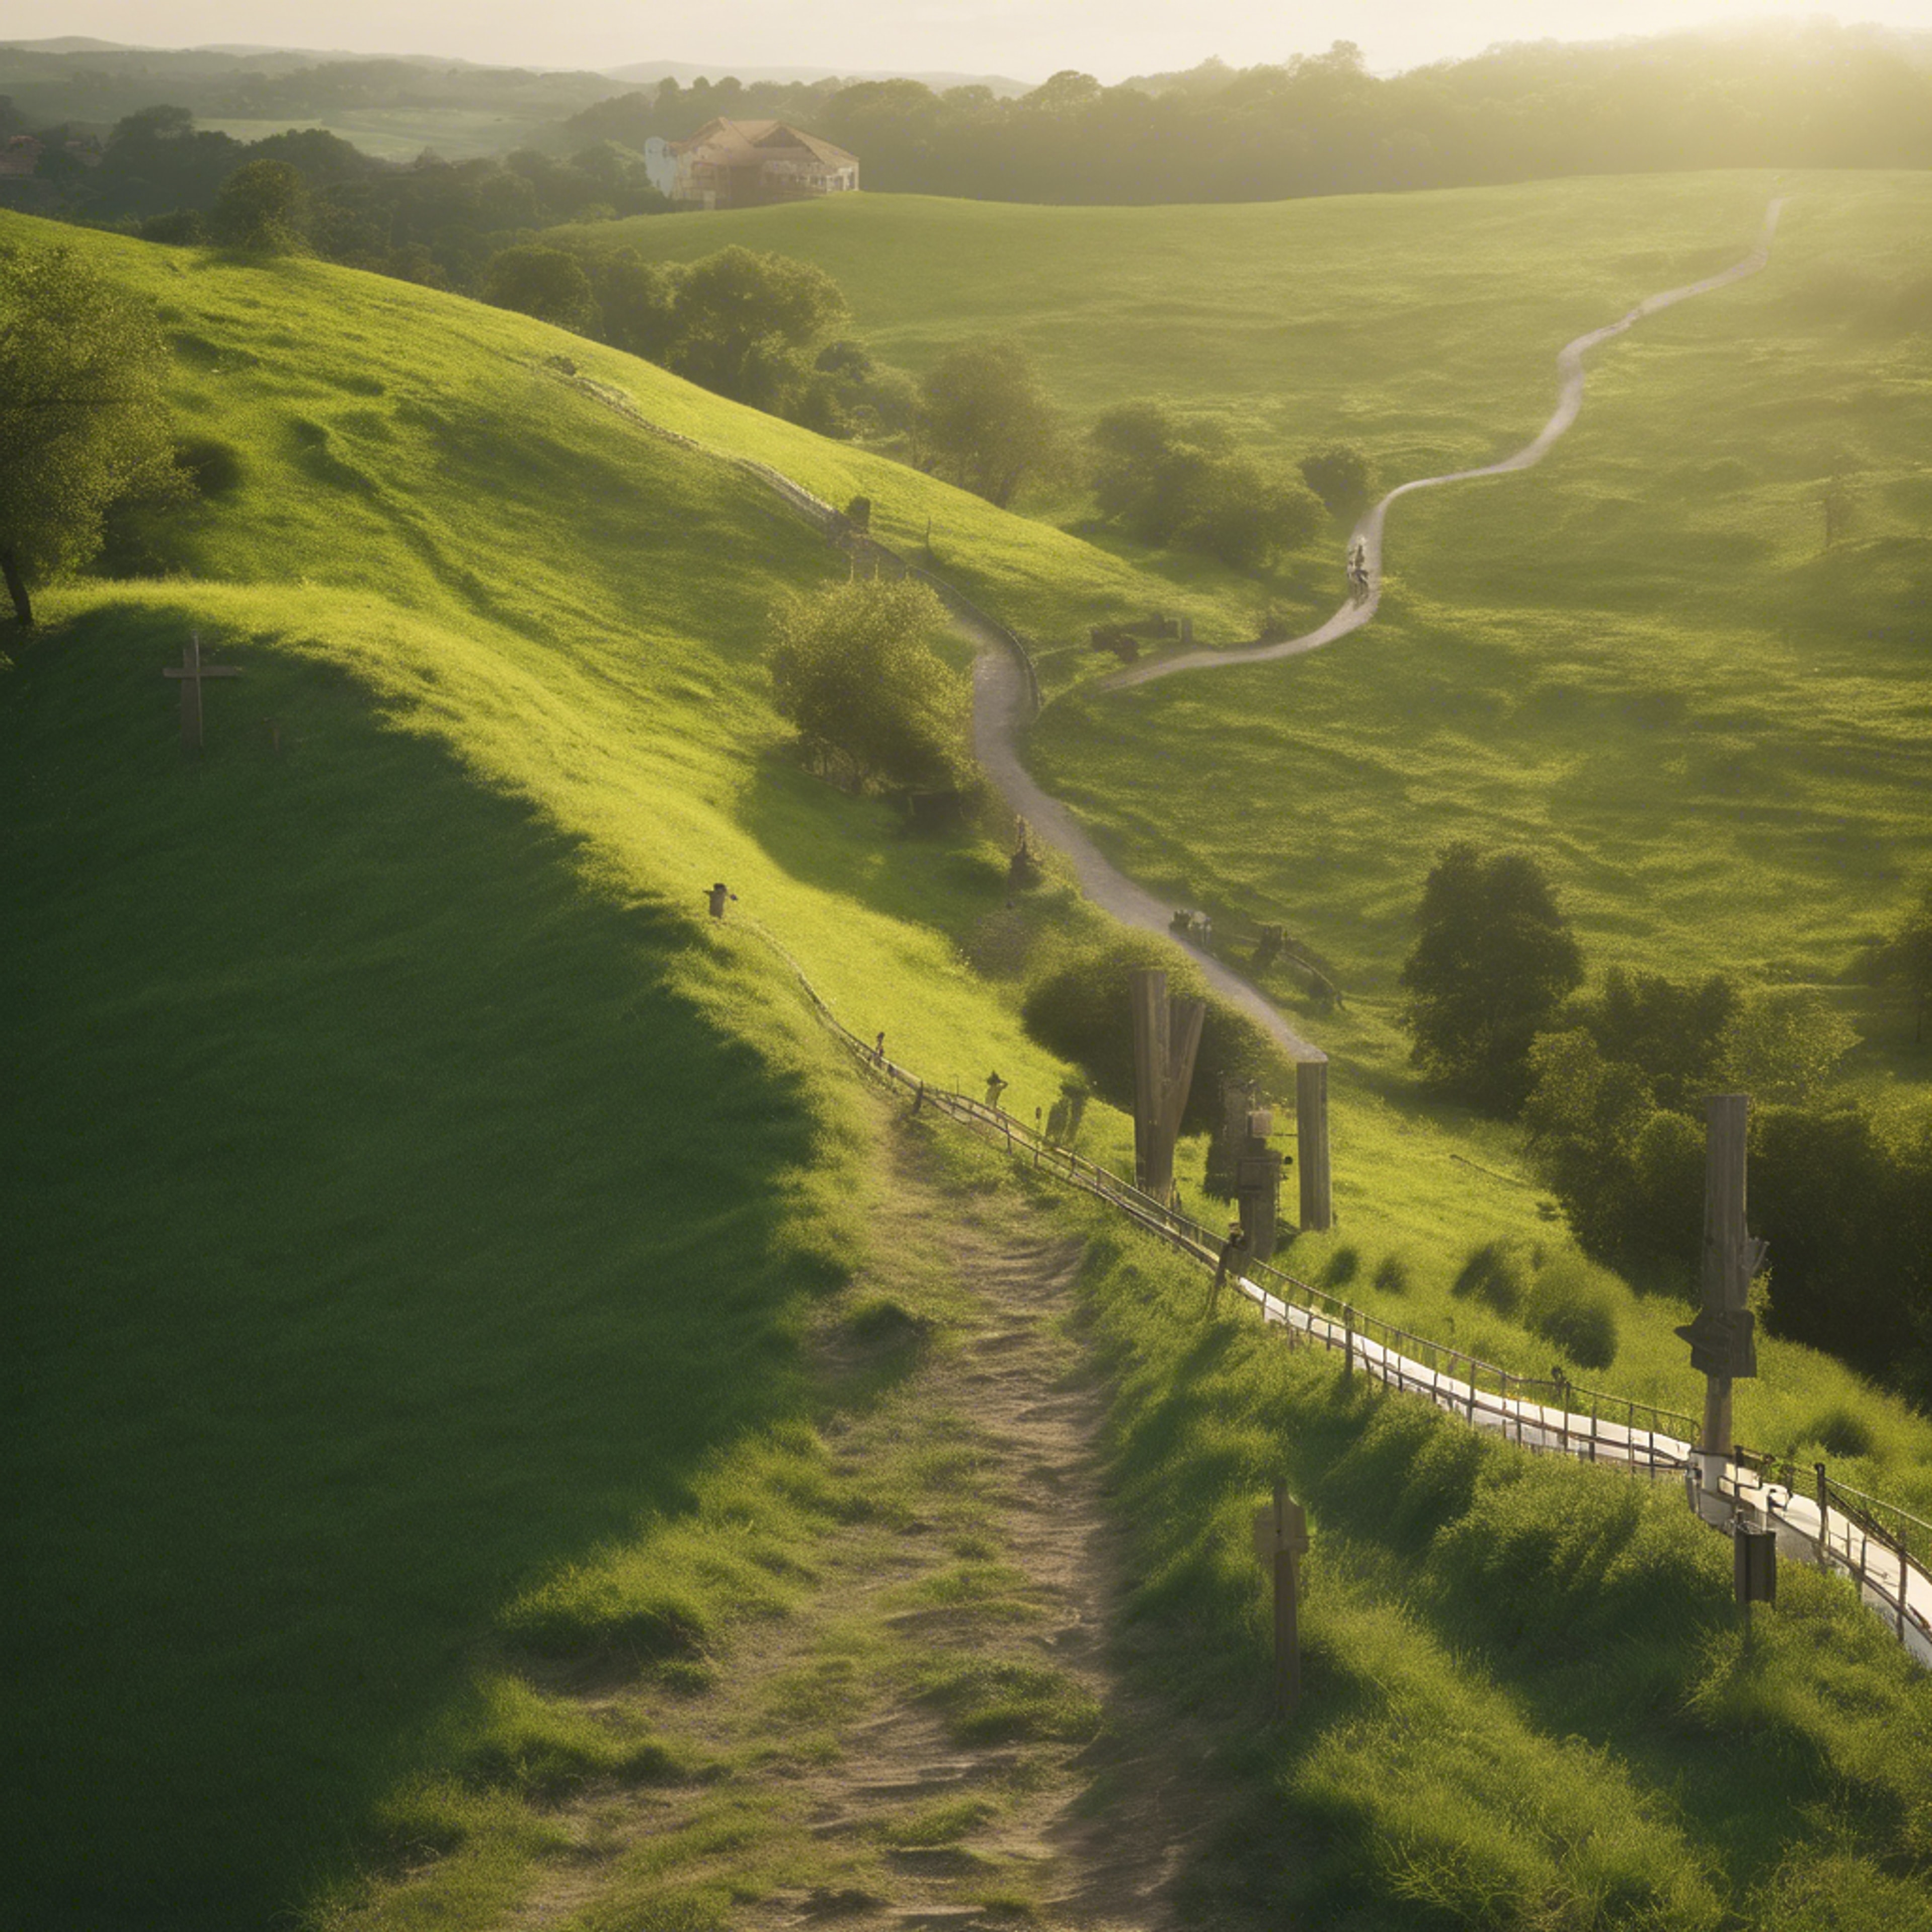 Late afternoon view of the curving trail of Stations of the Cross ascending a lush green hill. Wallpaper[a8d18ad78e49486e9b75]